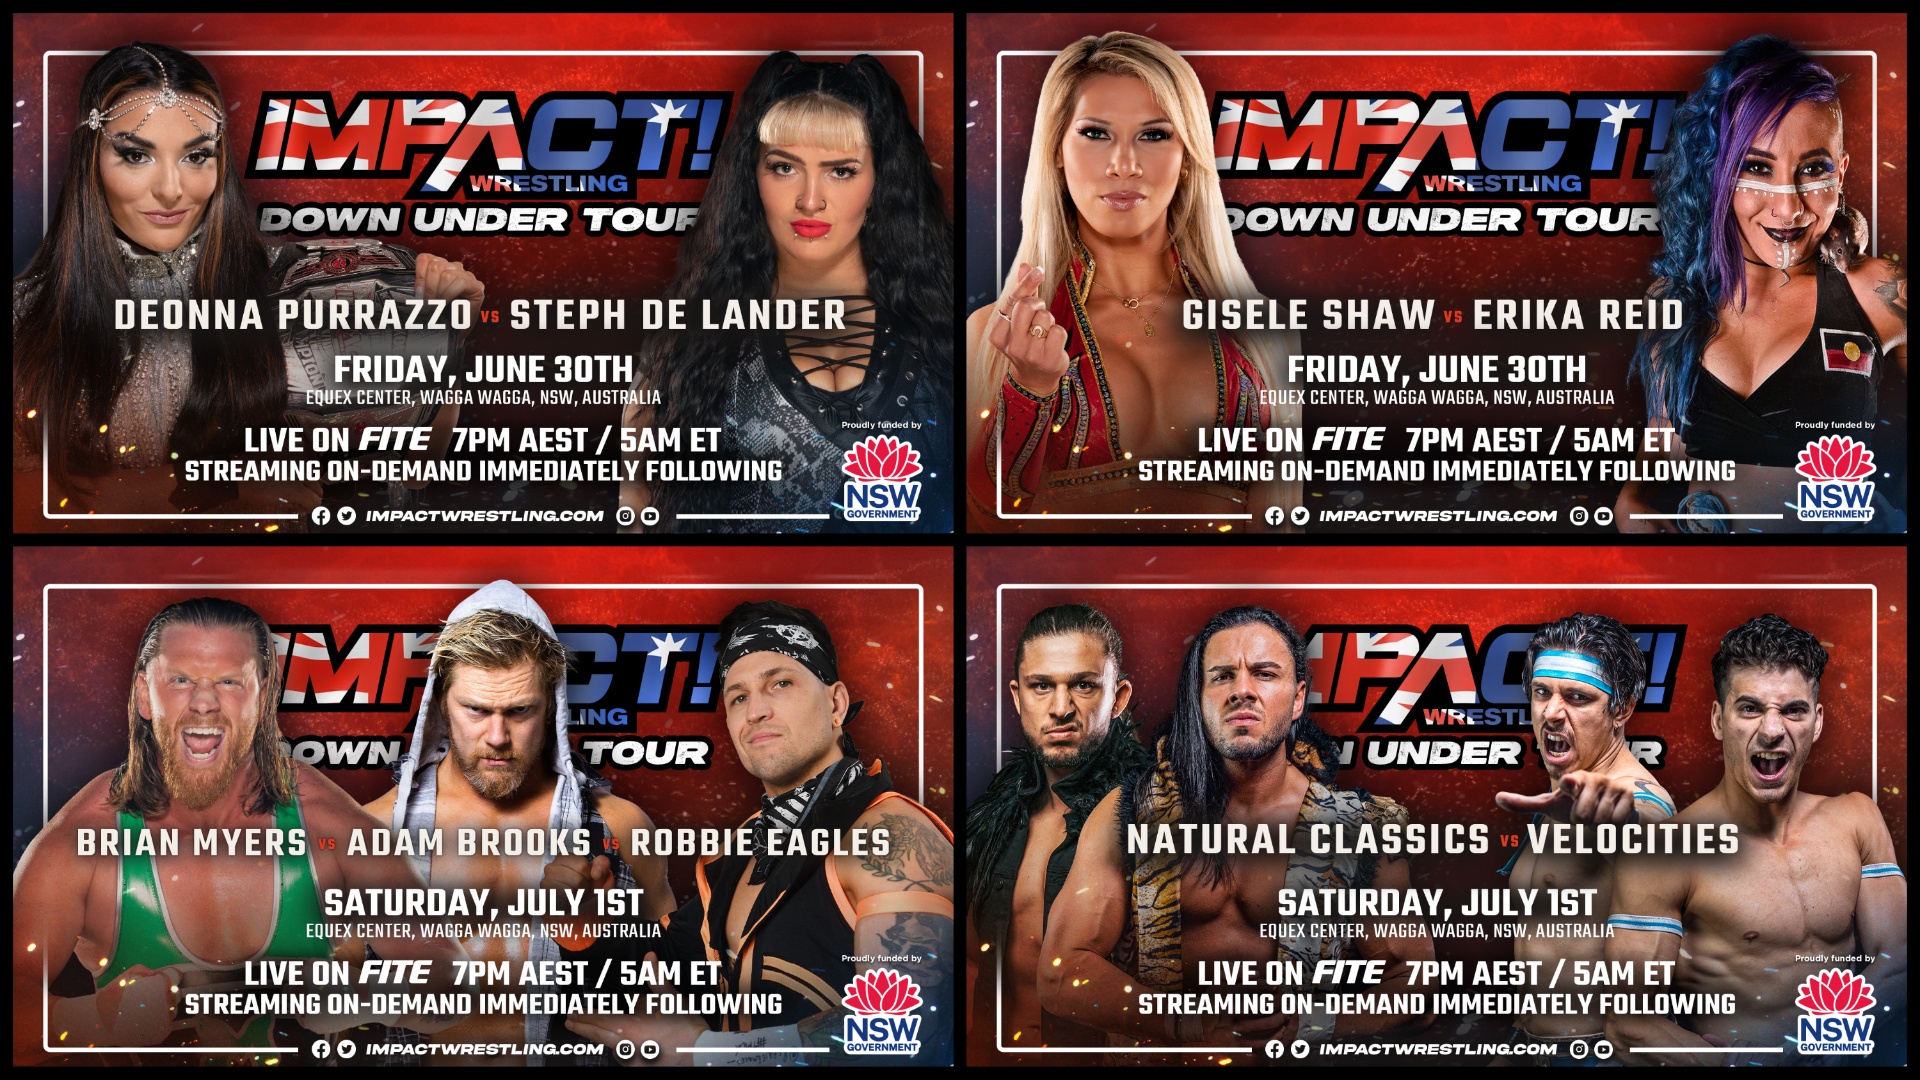 Top Australian Talent Set for Action This Friday and Saturday at the IMPACT Wrestling Down Under Tour